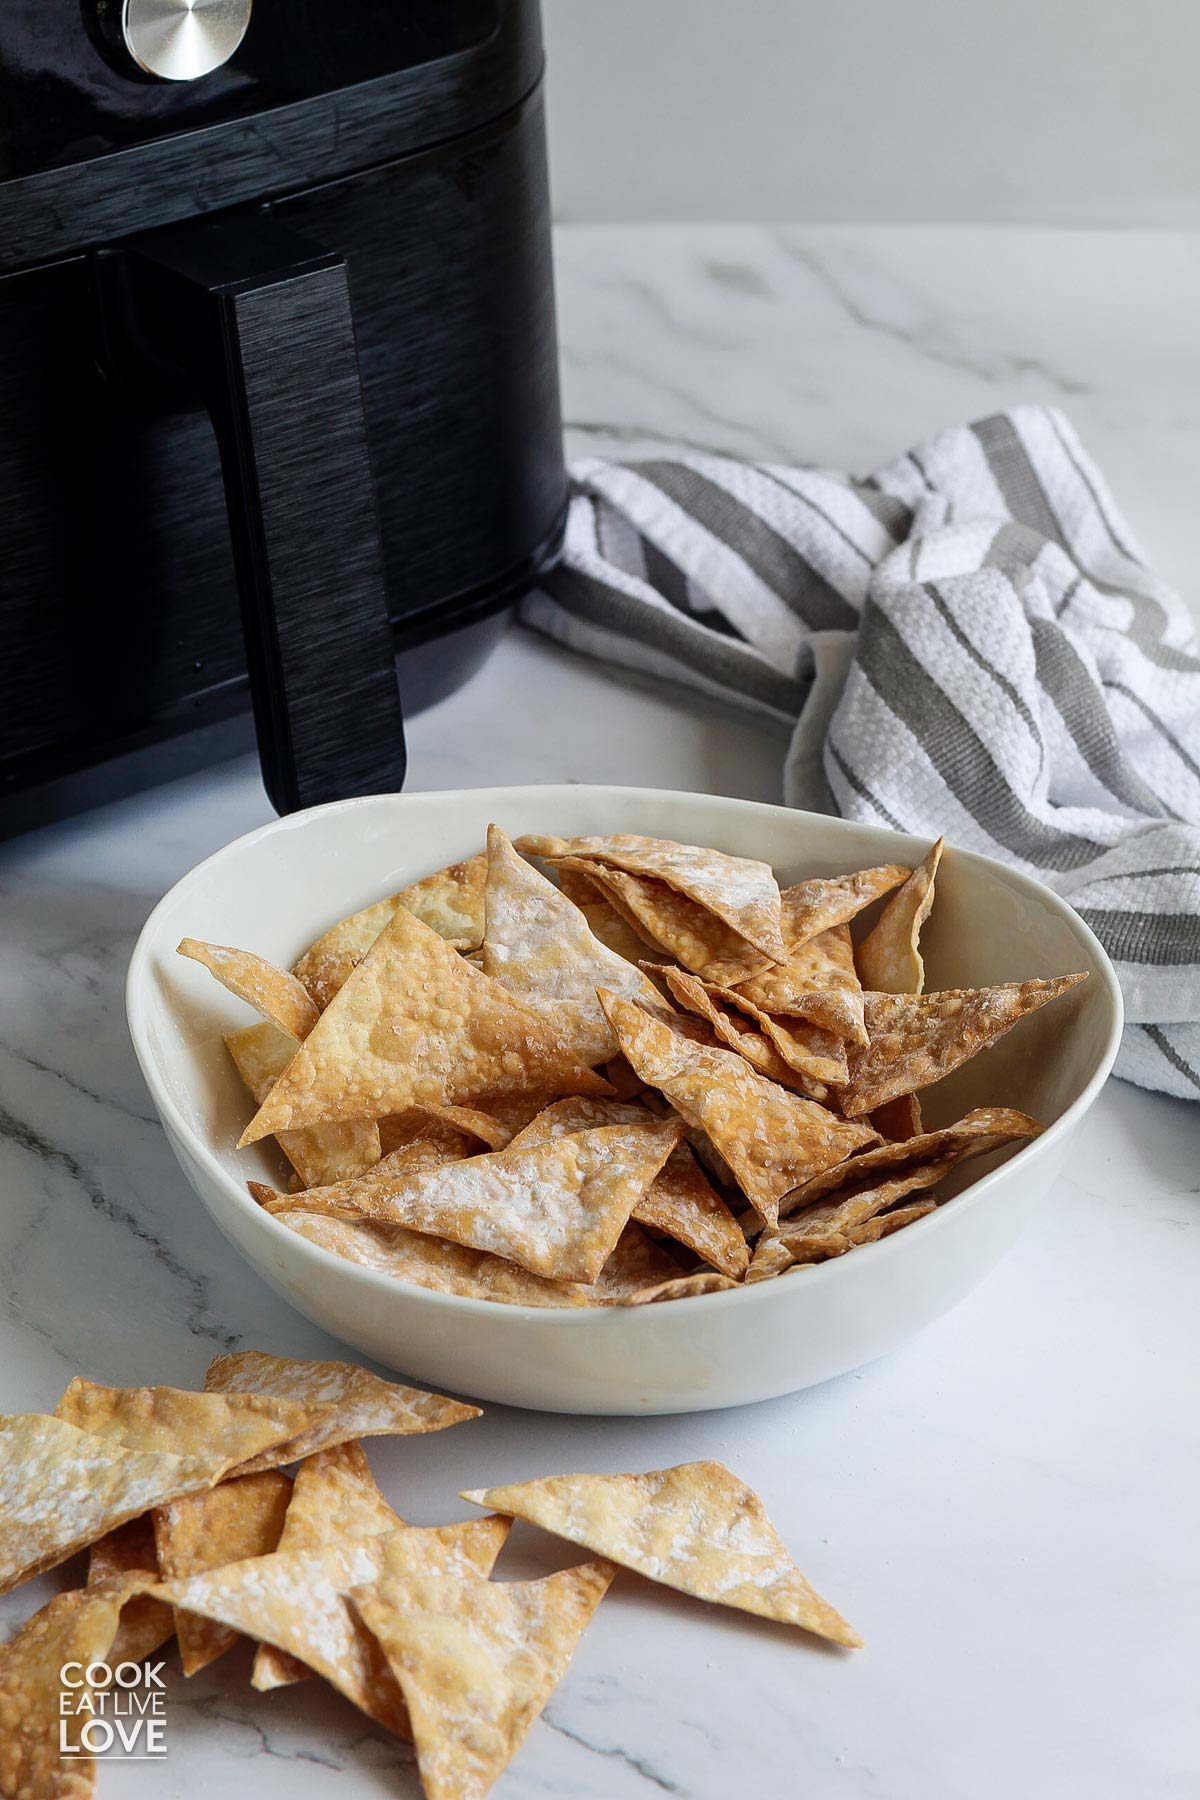 Bowl of air fryer wonton chips sitting in front of an air fryer.